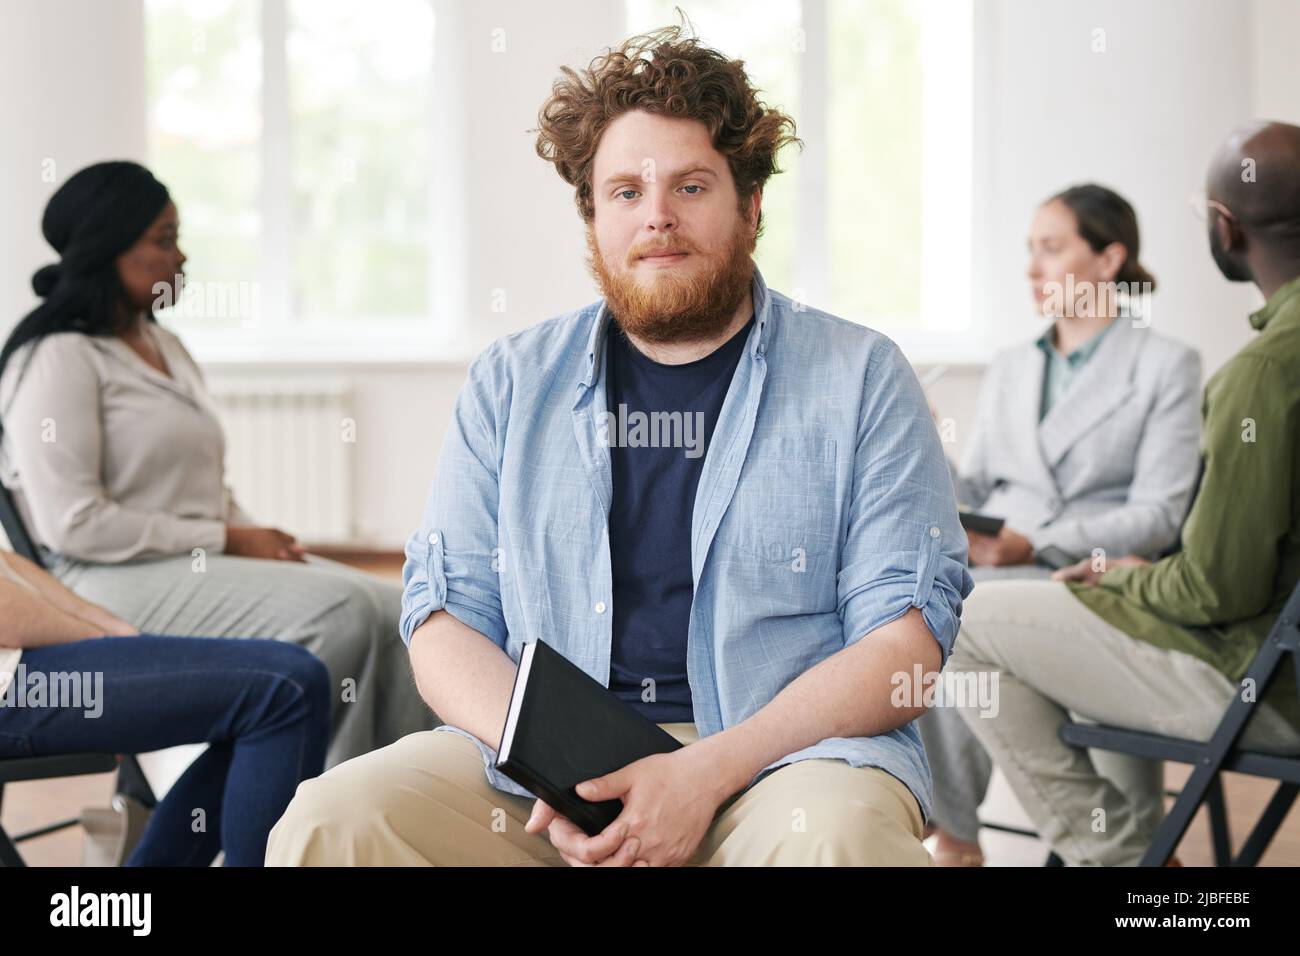 Young bearded man in casualwear holding notebook in black leather cover and looking at camera against group of people having session Stock Photo